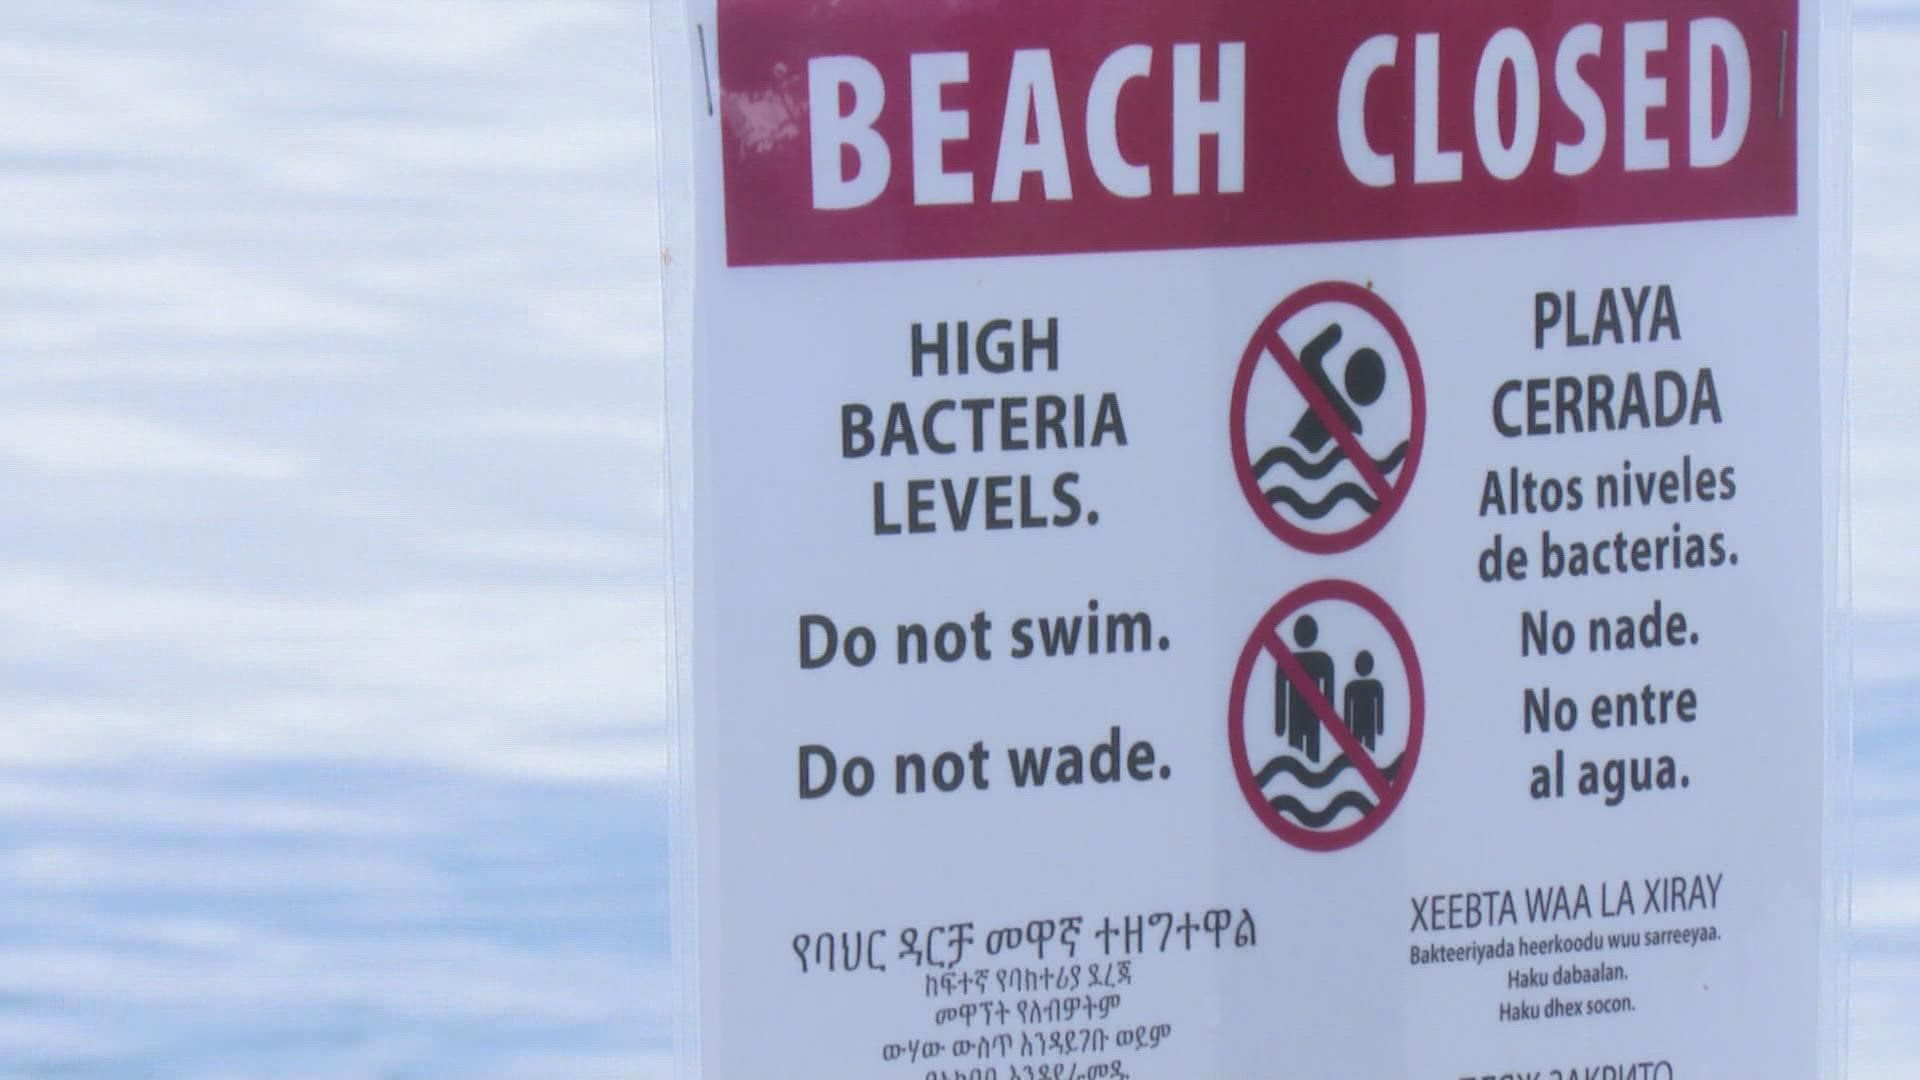 The beach will be tested weekly to determine when it can reopen to the public.